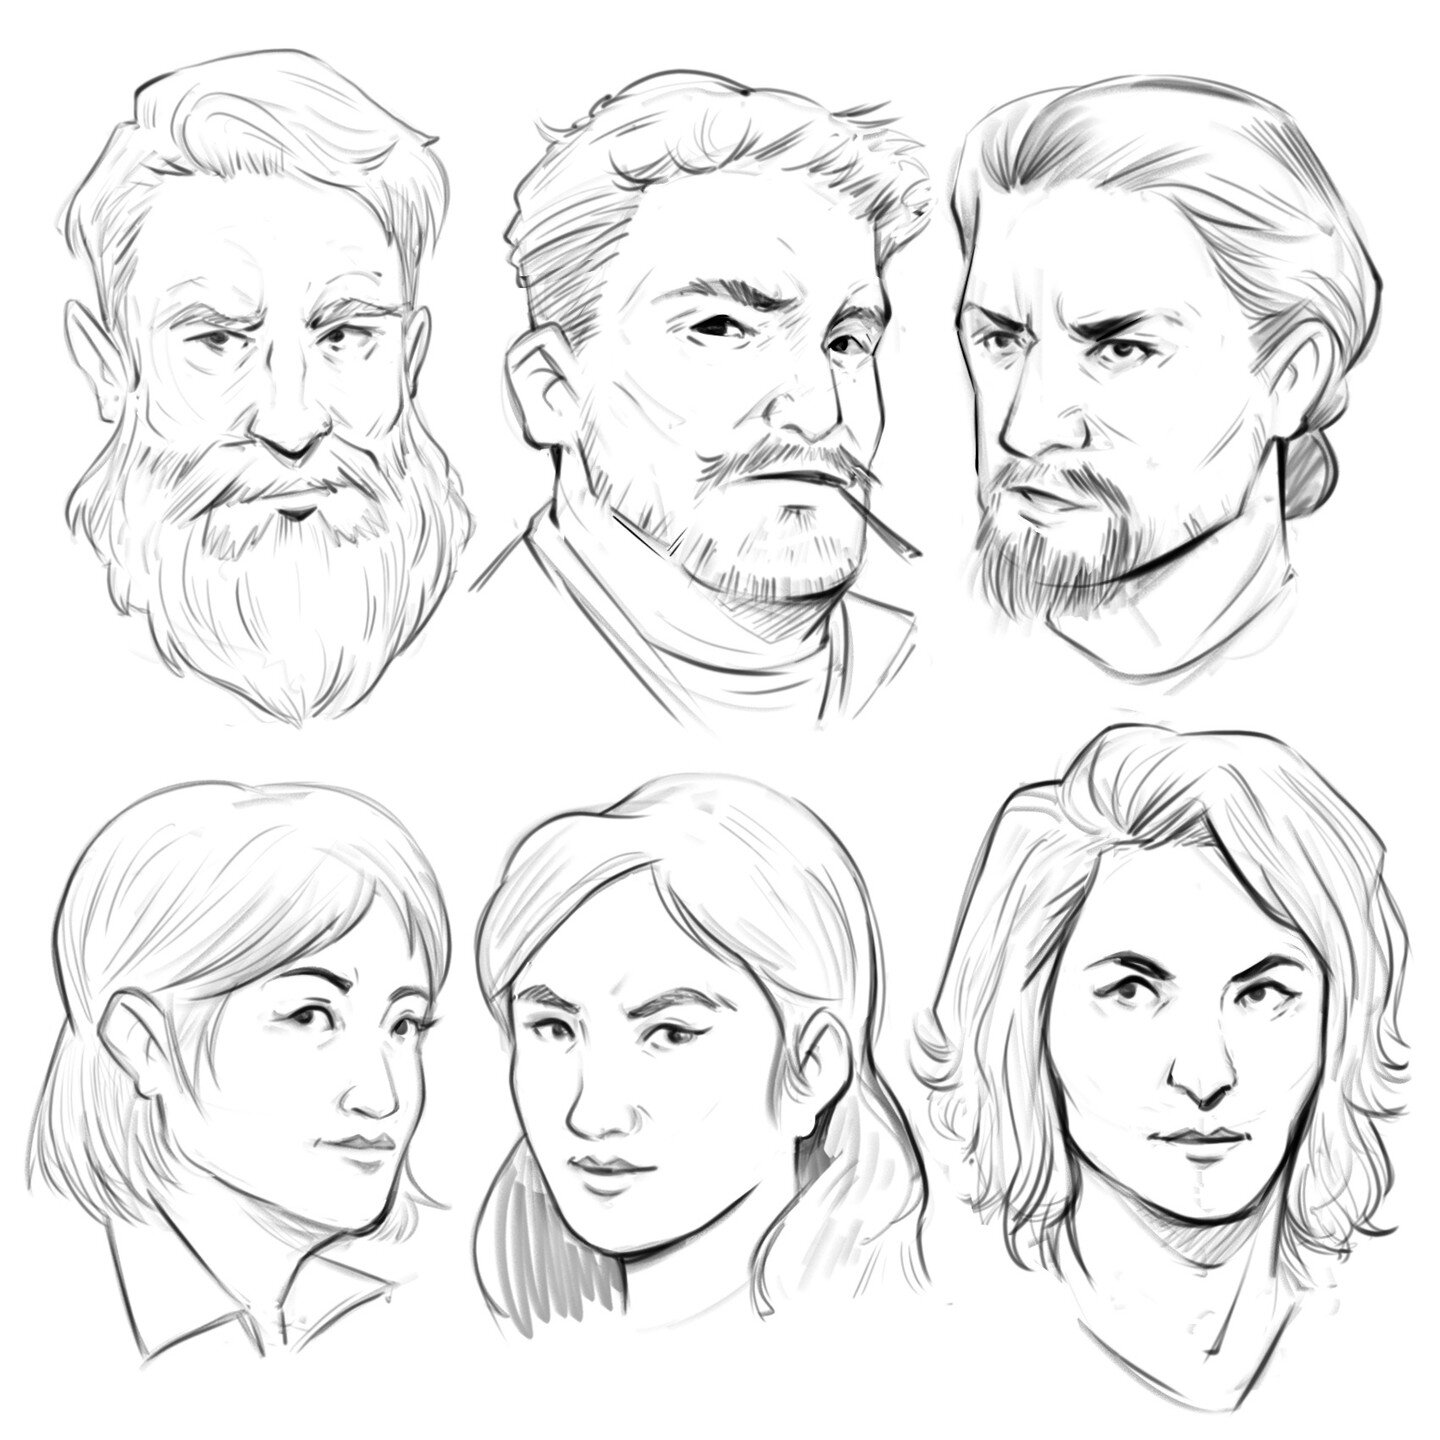 Some warm-up sketches that I did today, definitely been a while since I've done portraits.
.
.
.
.
.
.
.
.
.
.
.
#doodle #sketch #portrait #art #artistoninstagram #warmup #sketches #instaart #artist #faces #linework #lineart #digitalart #illustration